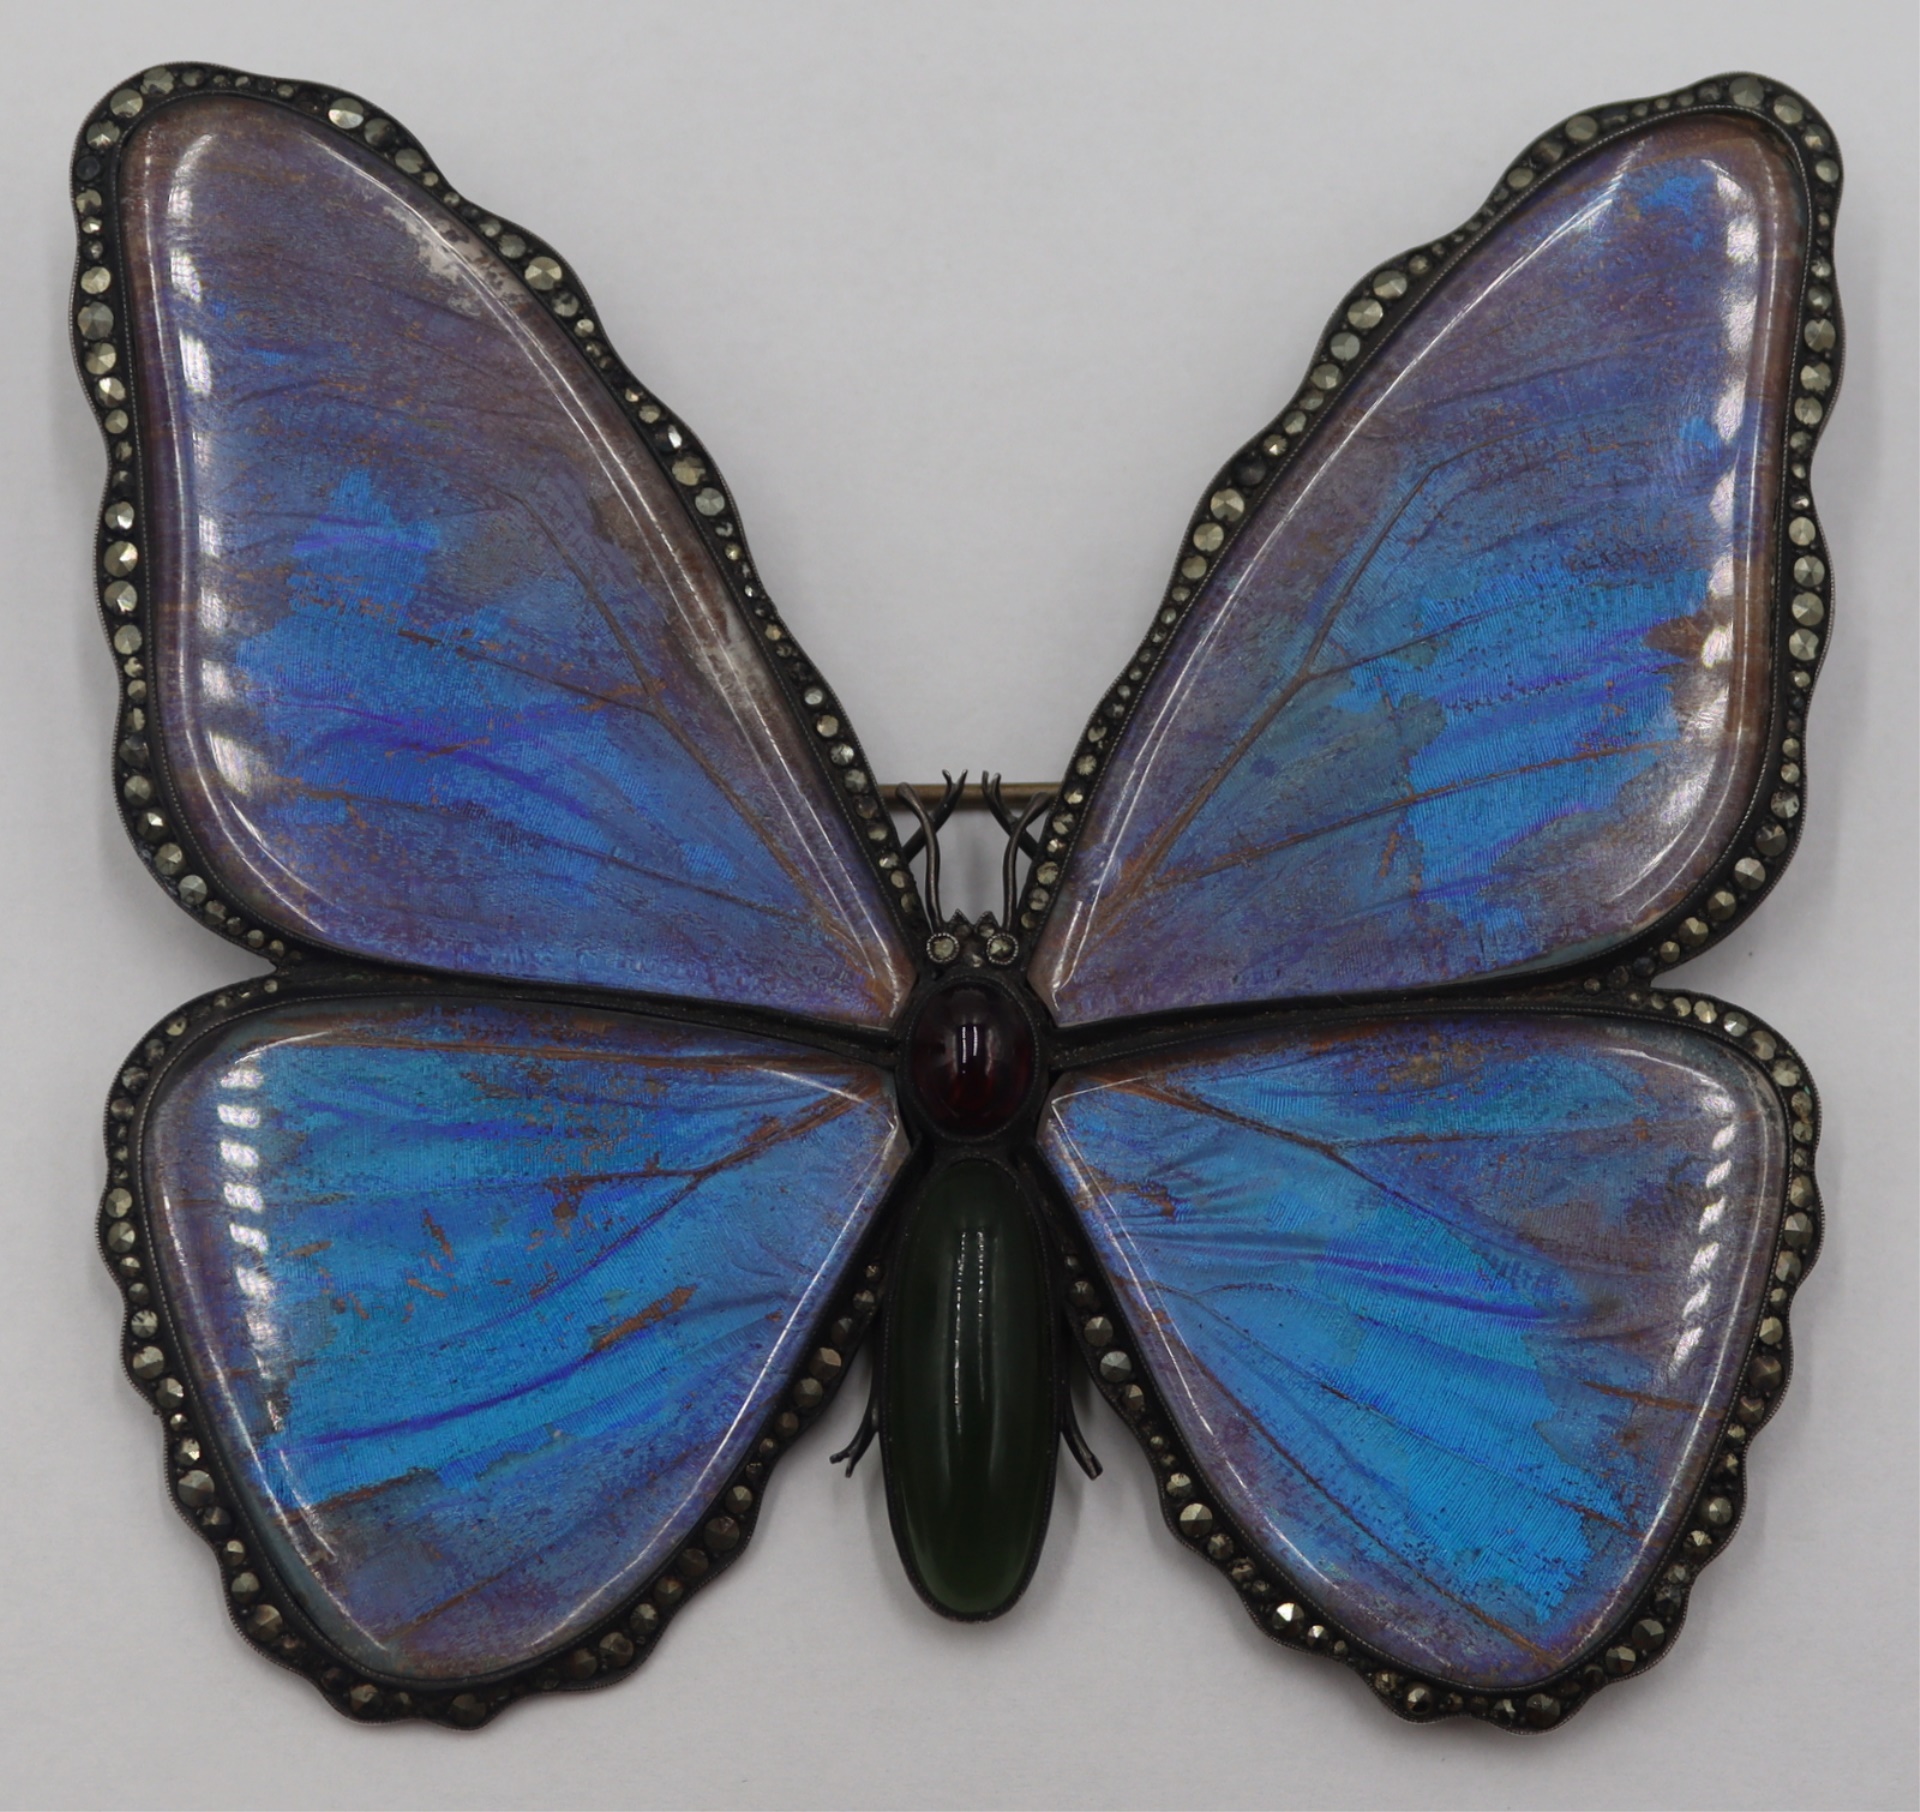 JEWELRY. UNUSUAL LARGE BUTTERFLY